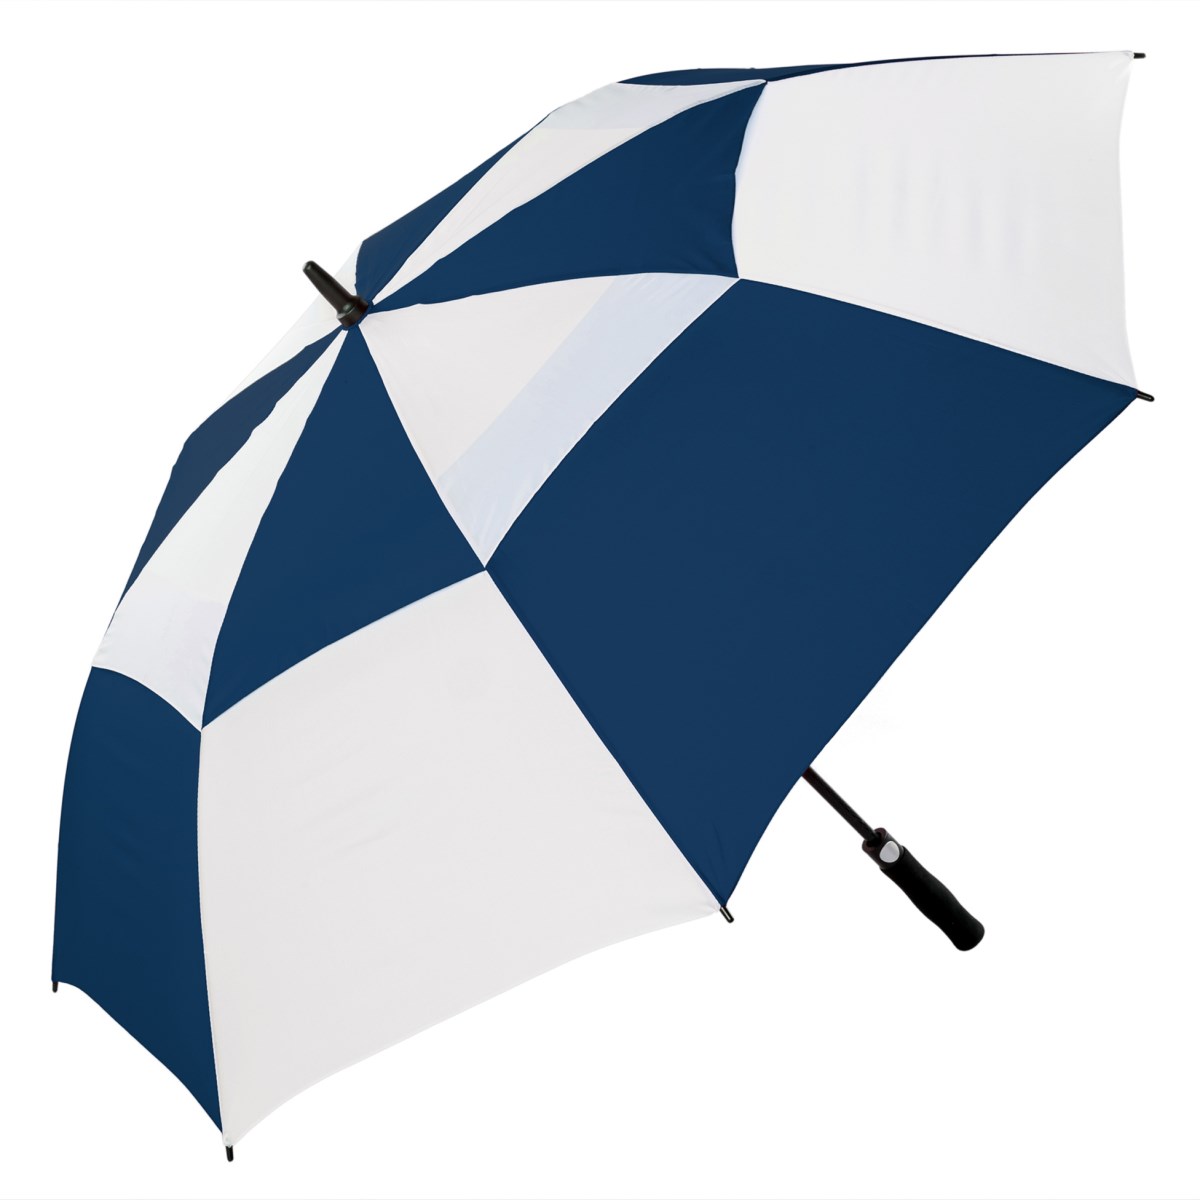 Premium Navy & White Golf Umbrella with windproof vented canopy and auto-open mechanism.